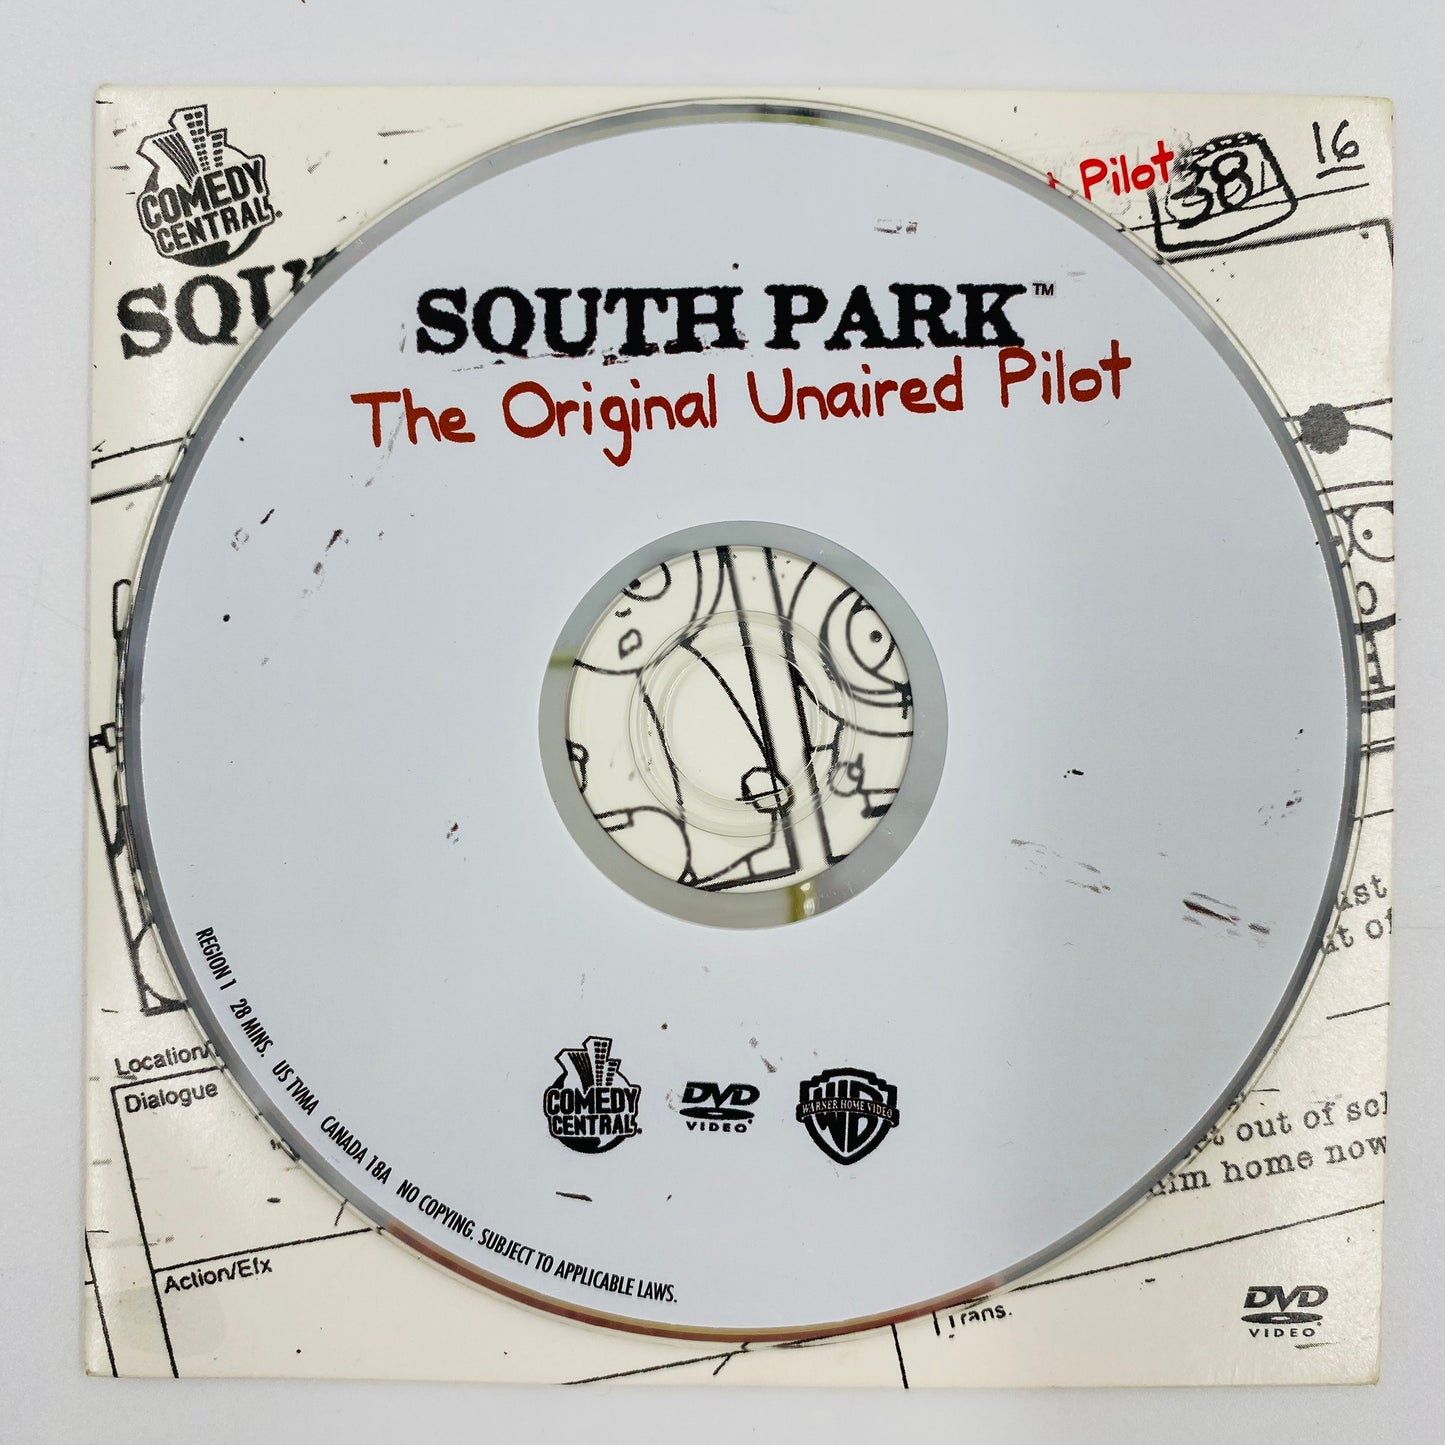 South Park The Original Unaired Pilot DVD (2003) Warner Home Video